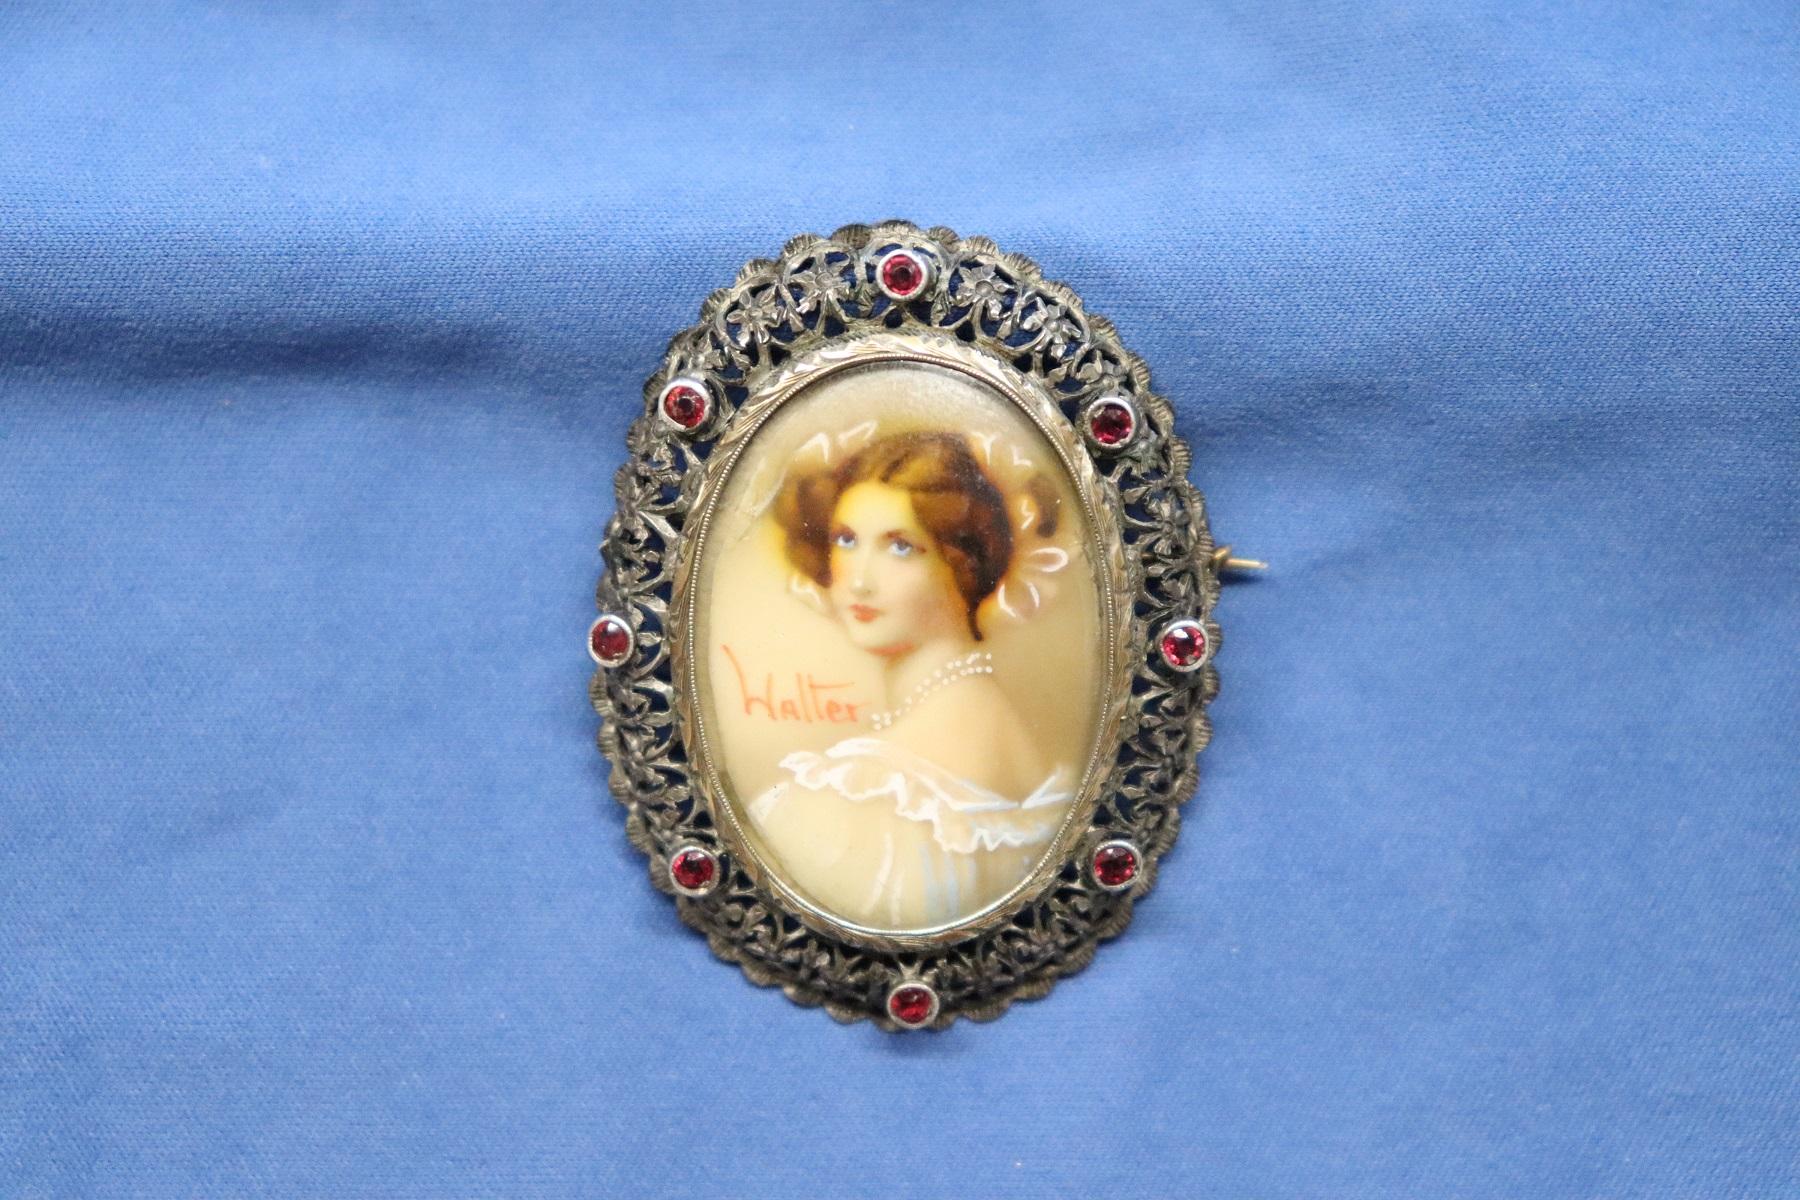 Italian Art Nouveau Brooch in Gold and Silver with Rubies and Central Miniature Painting